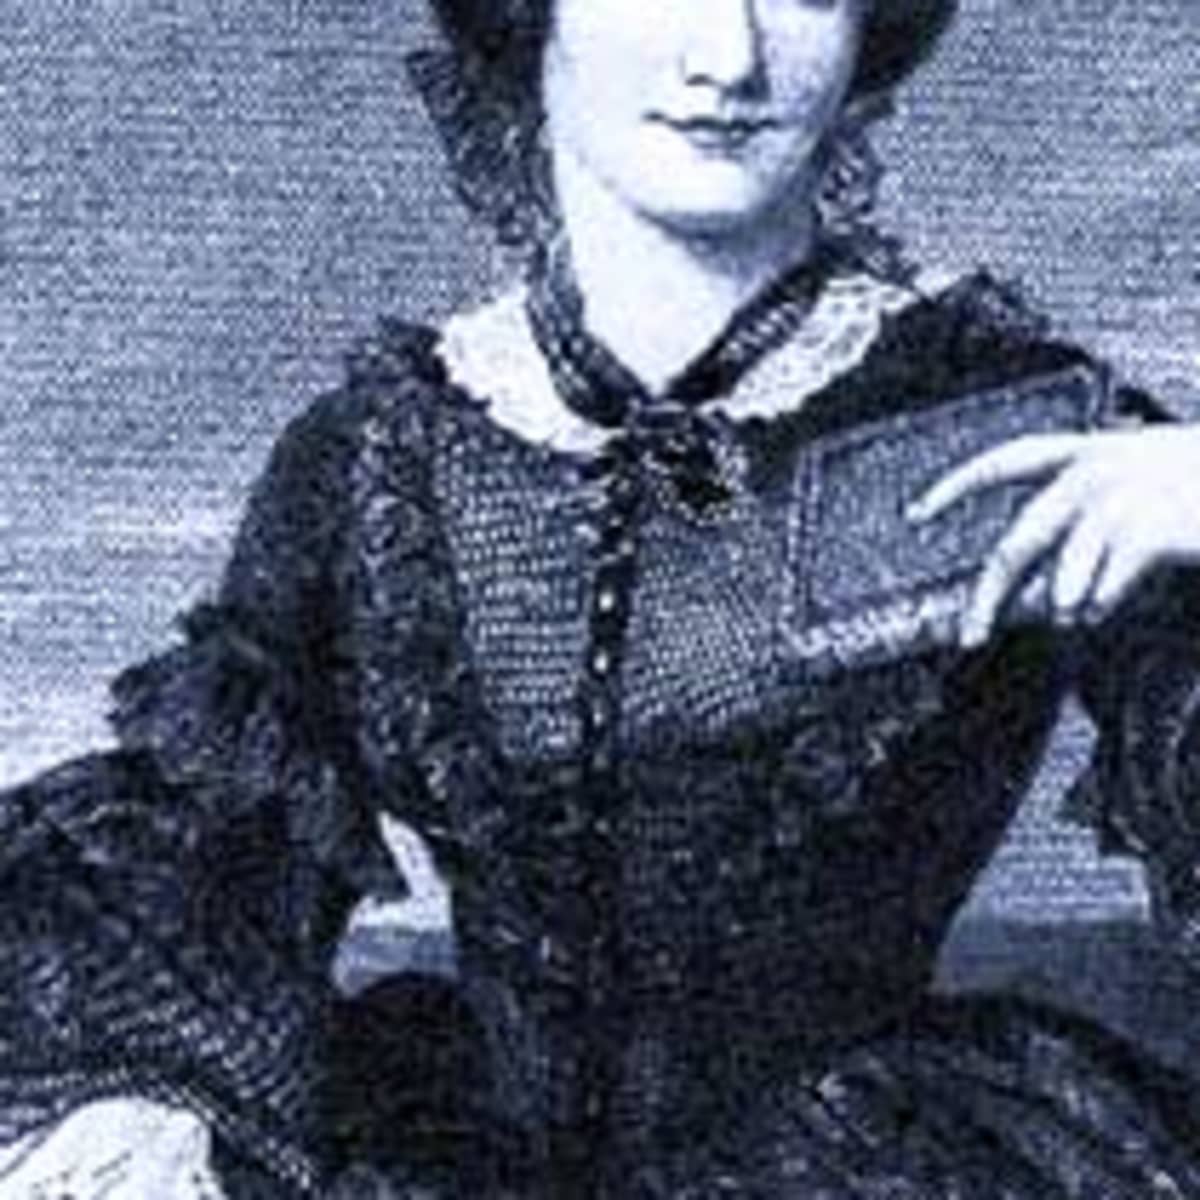 The Life of Charlotte Brontë (Illustrated Edition): Delightful Biography of  the Author of Jane Eyre by One of Her Closest Friends See more